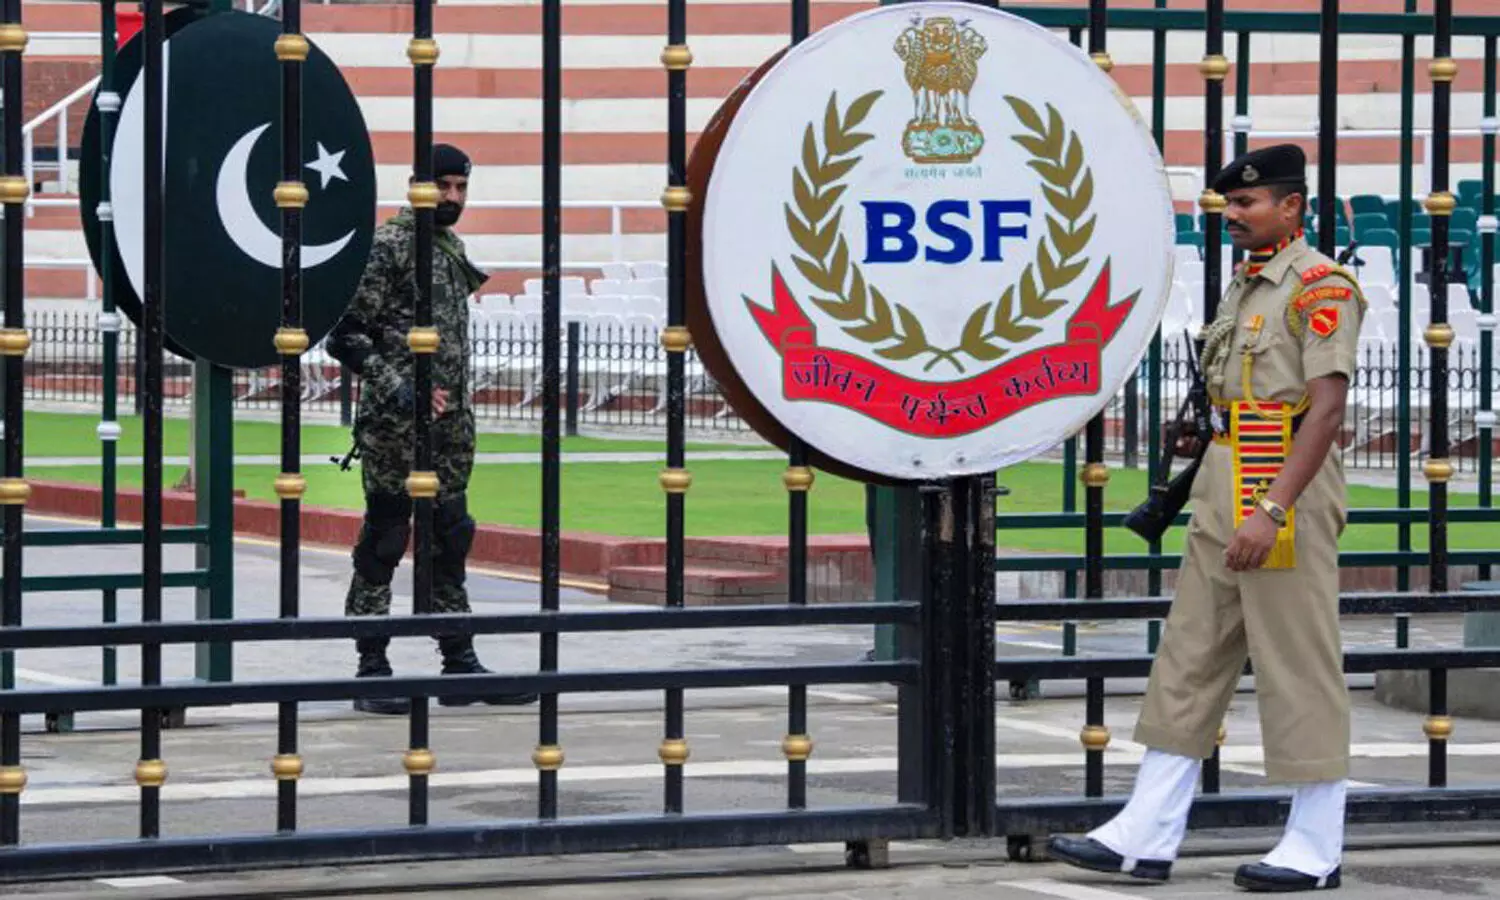 BSF Recruitment 2021: Apply for Air Wing, Para Medical & Veterinary staff; check details